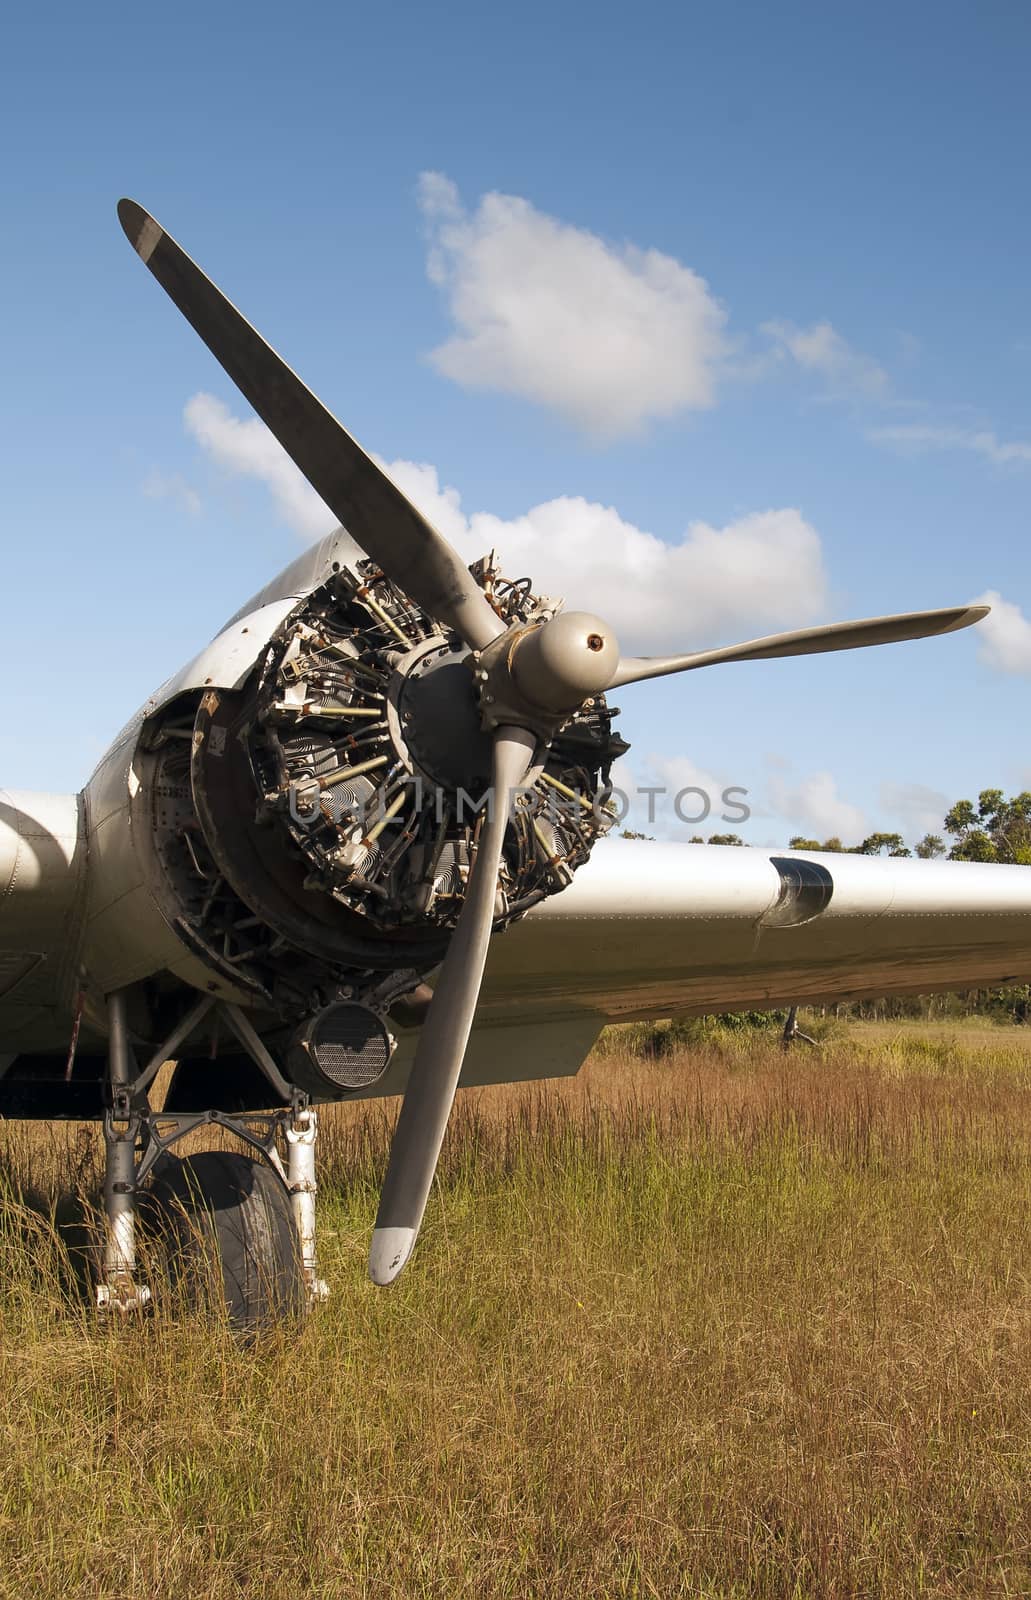 Propeller and engine cowl of an old DC3 aeroplane by definitearts